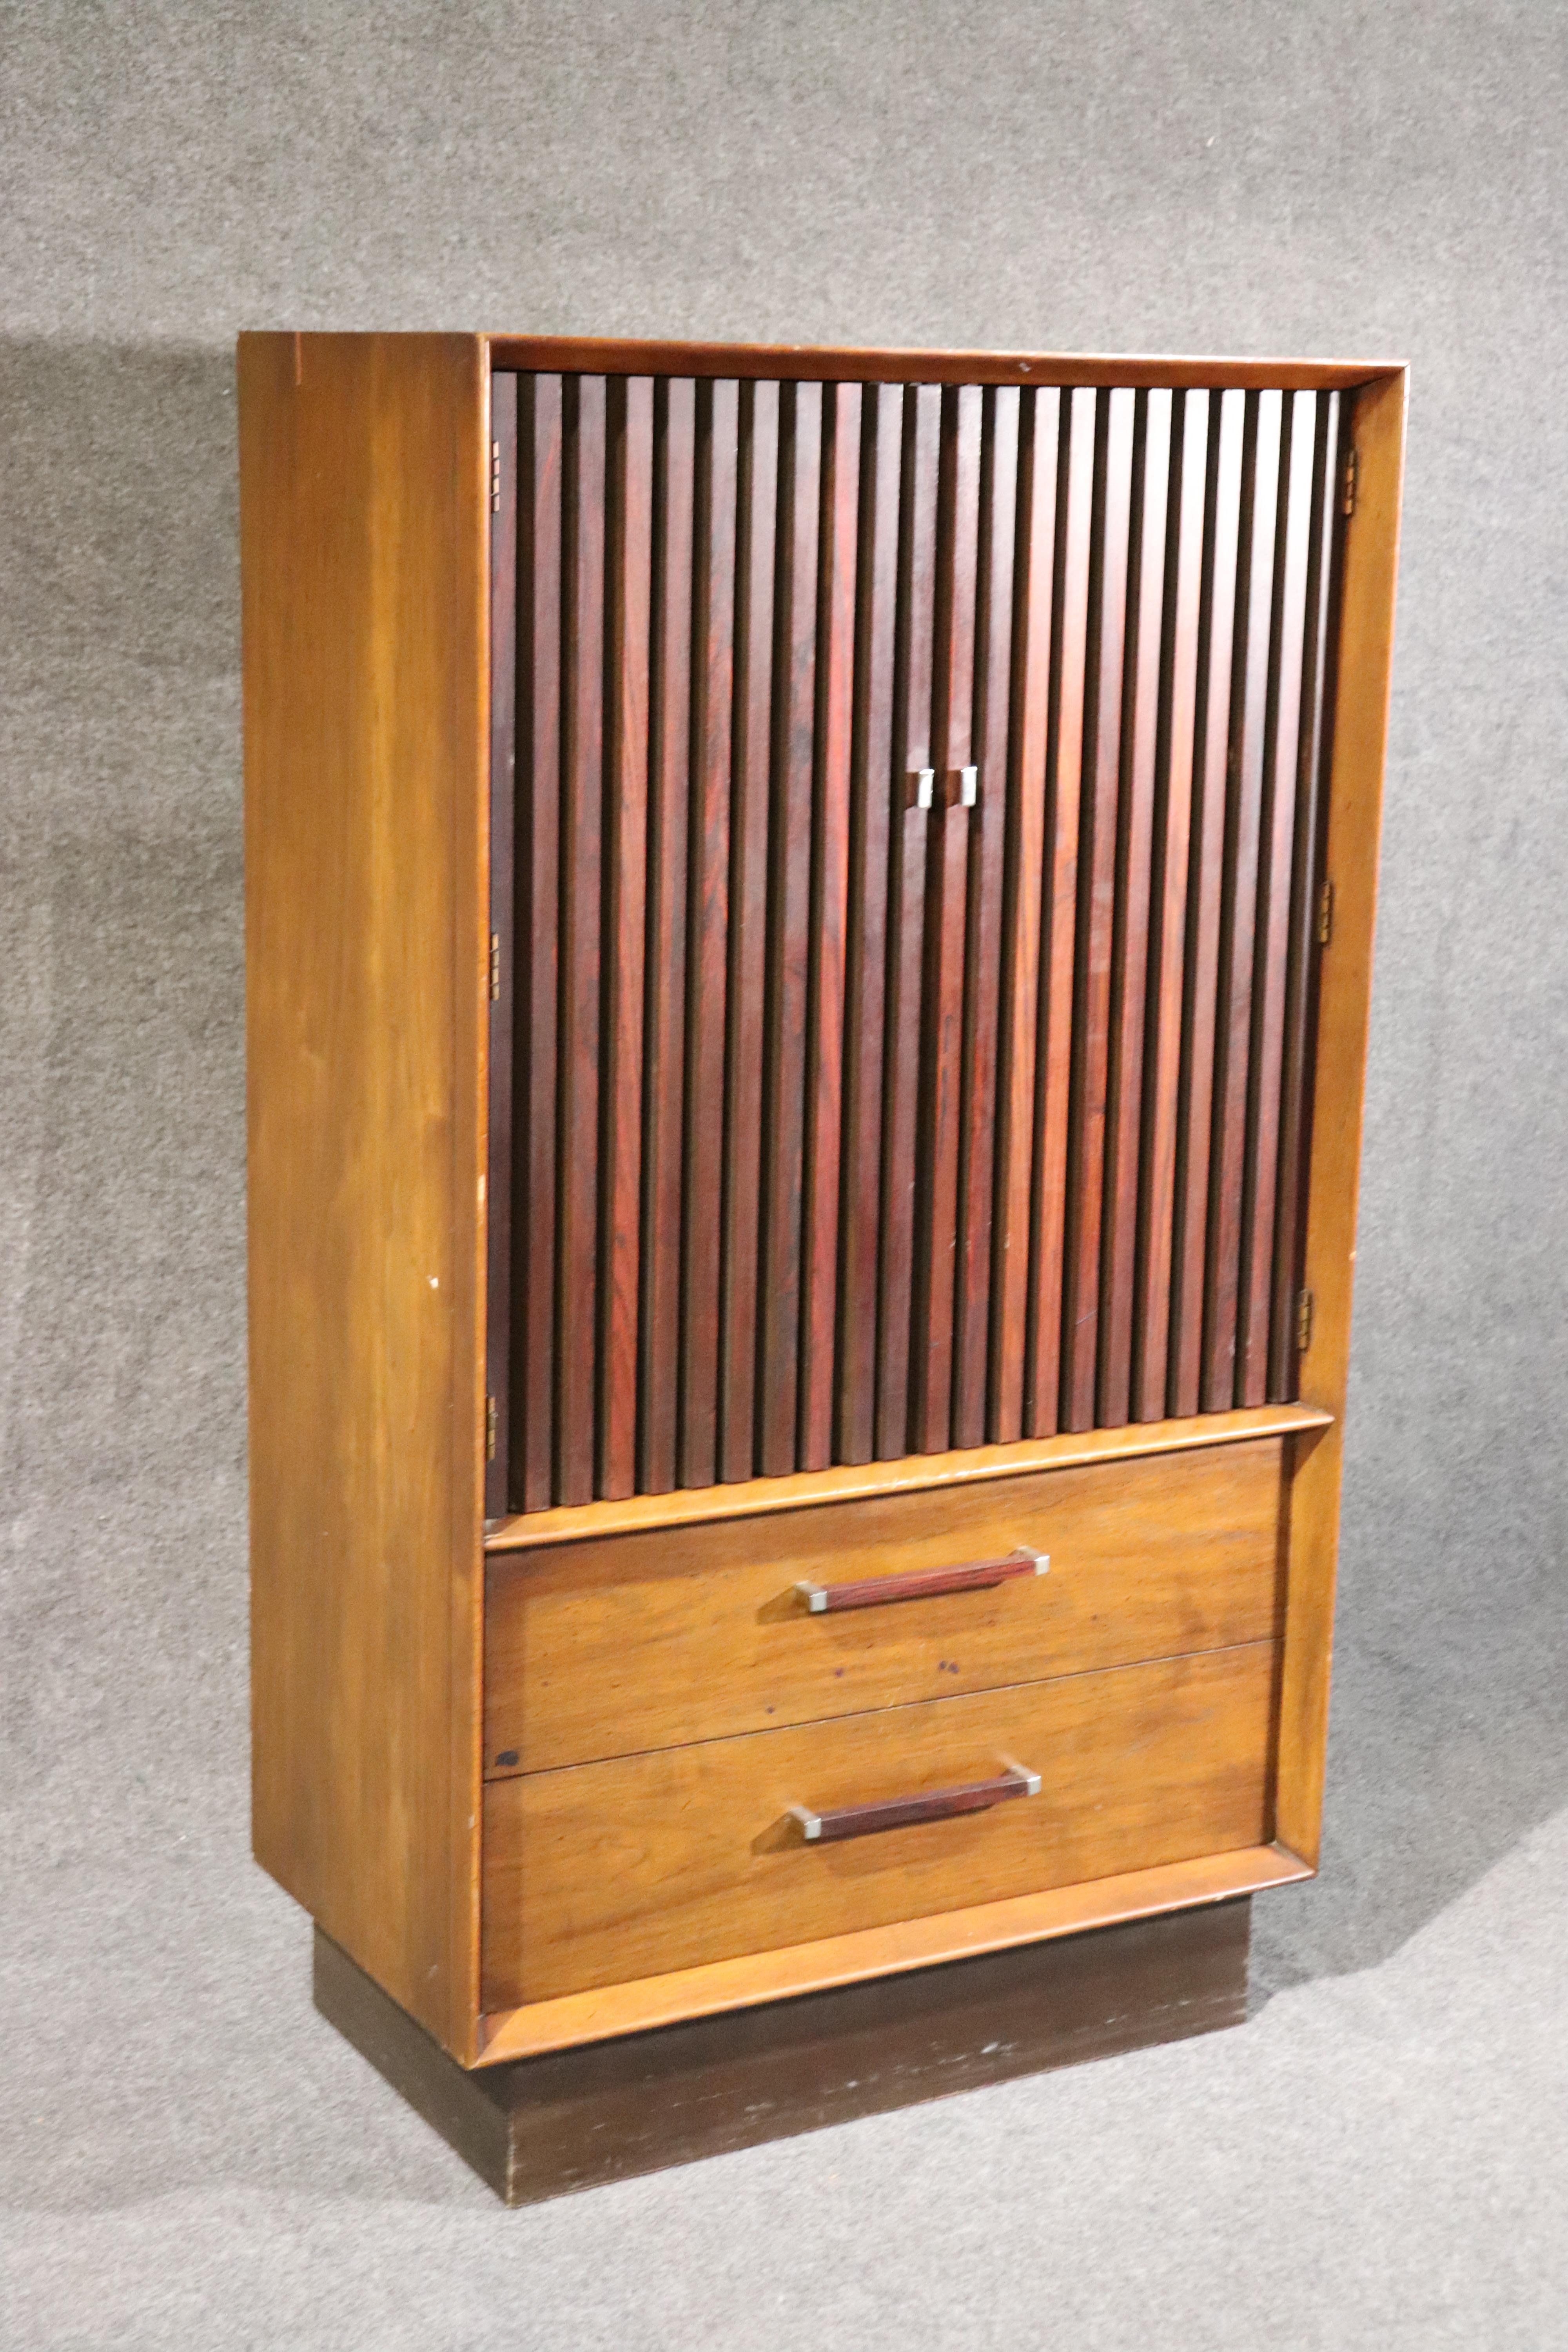 This is a superbly designed rosewood and walnut lane tall dresser. The dresser is from the 1960s or perhaps 1950s era. The dresser measures 60 inches tall x 34 wide x 19 deep. There are other matching pieces as well.